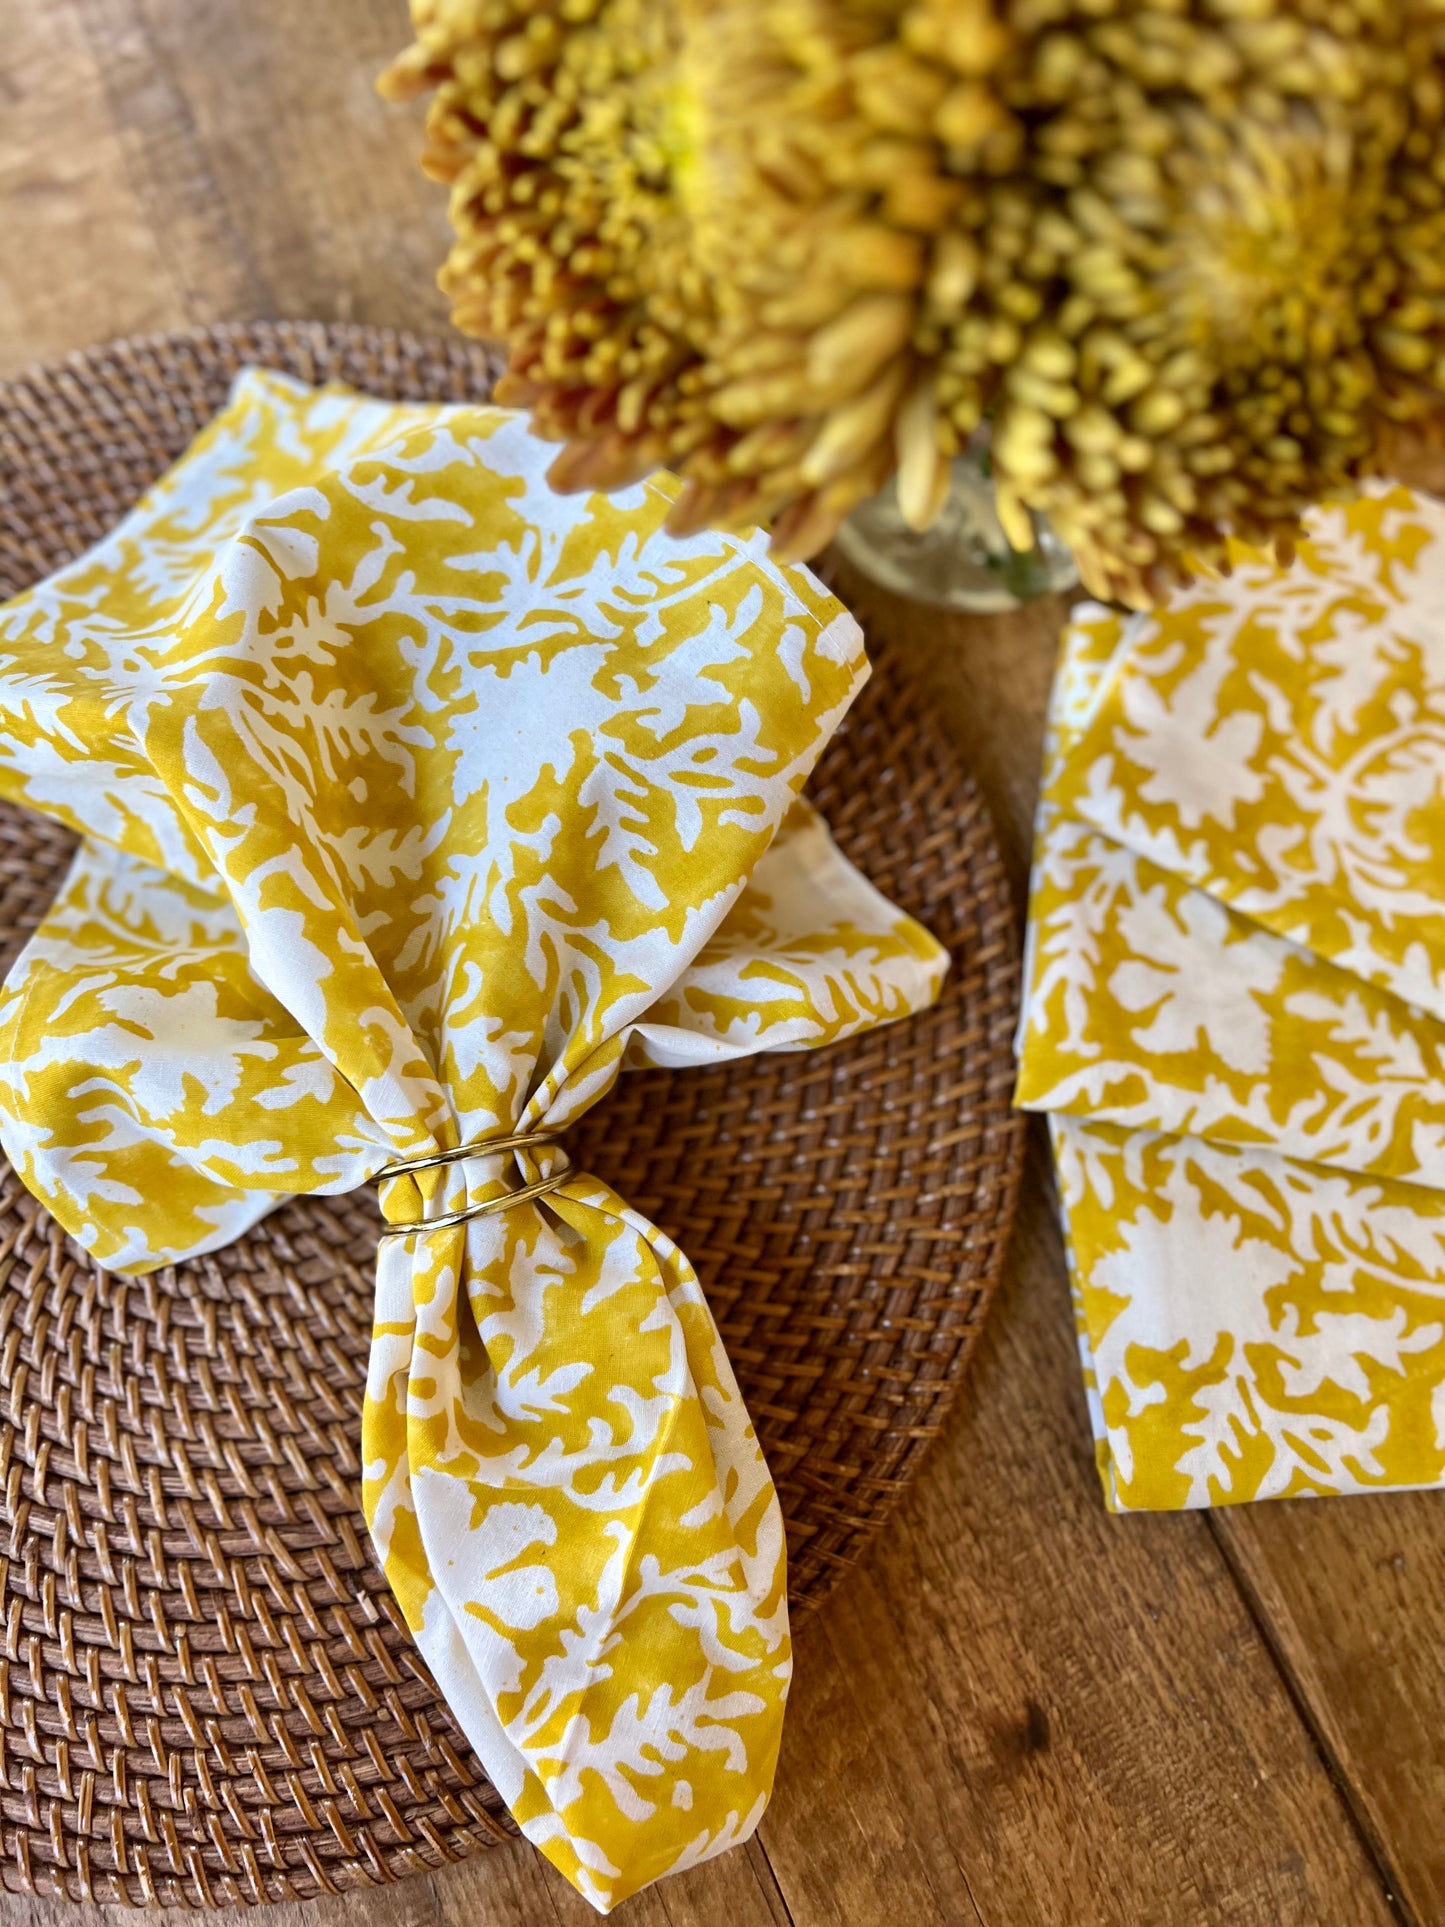 Pressed Florals in Marigold Yellow - Set of 4